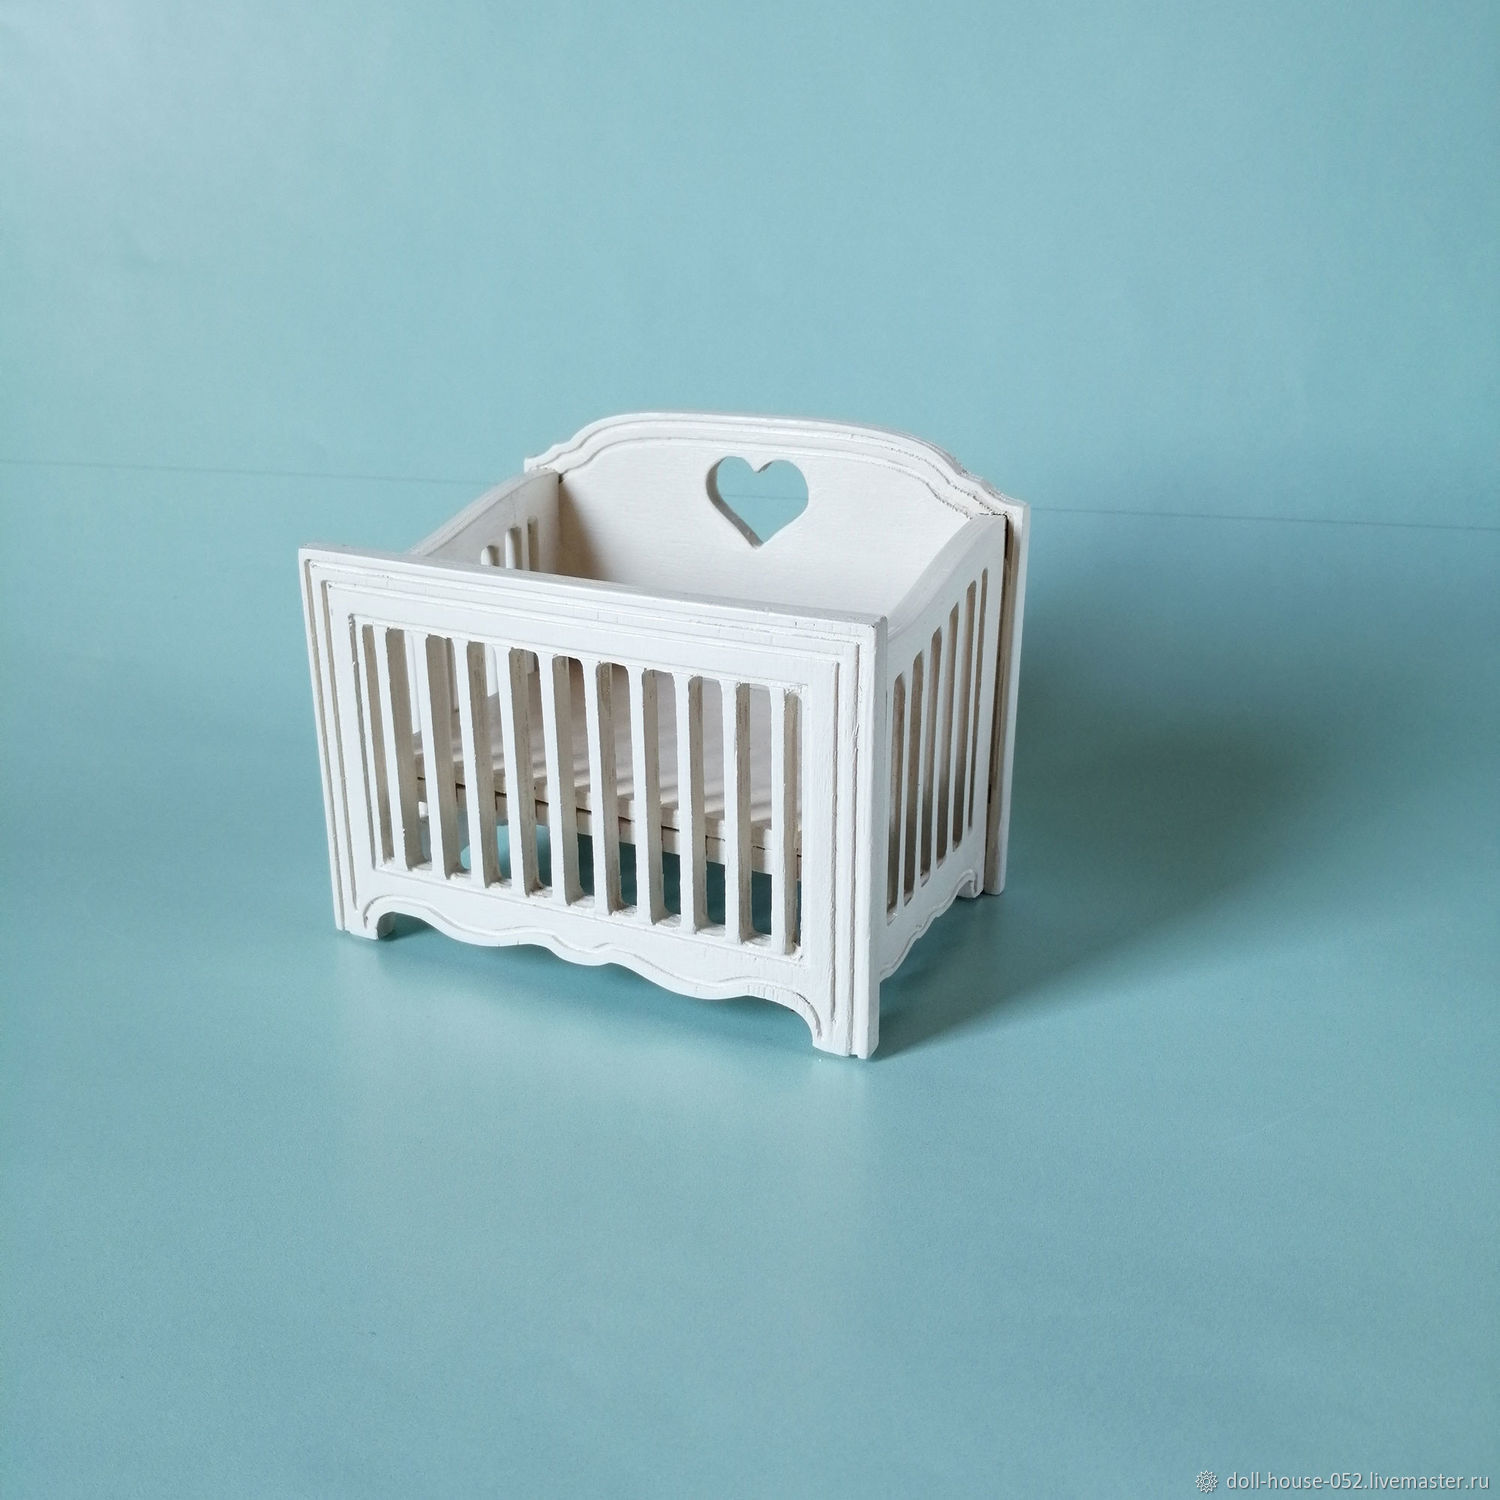 cot for reborn doll